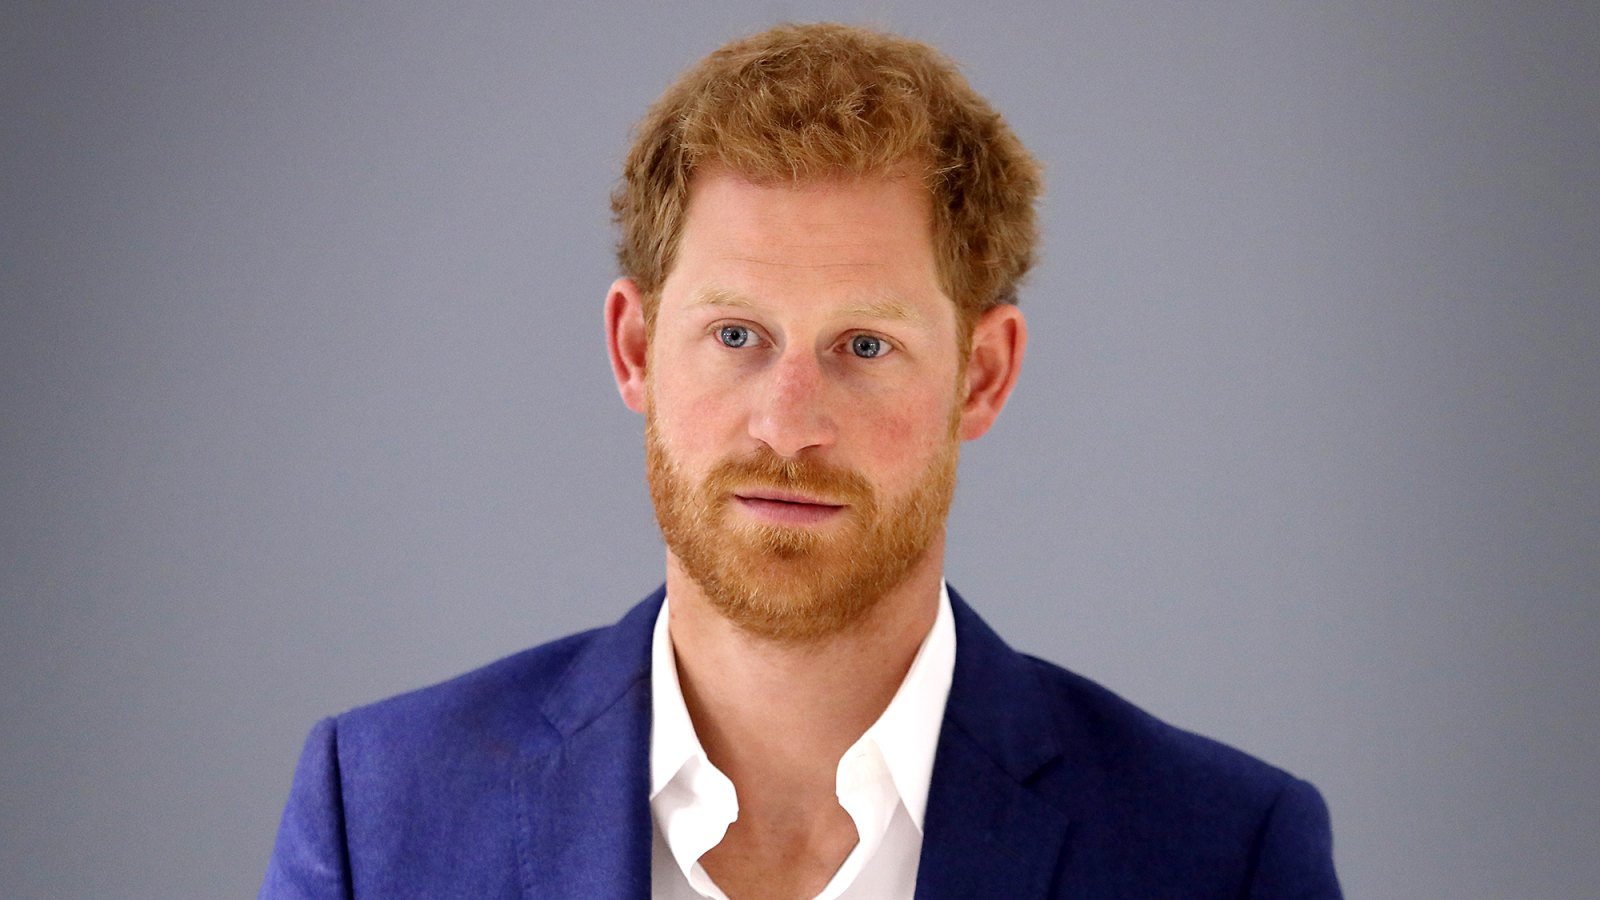 Prince Harry: Men in the Royal Family Feel 'Temptation' to Marry Someone Who 'Fits the Mold'